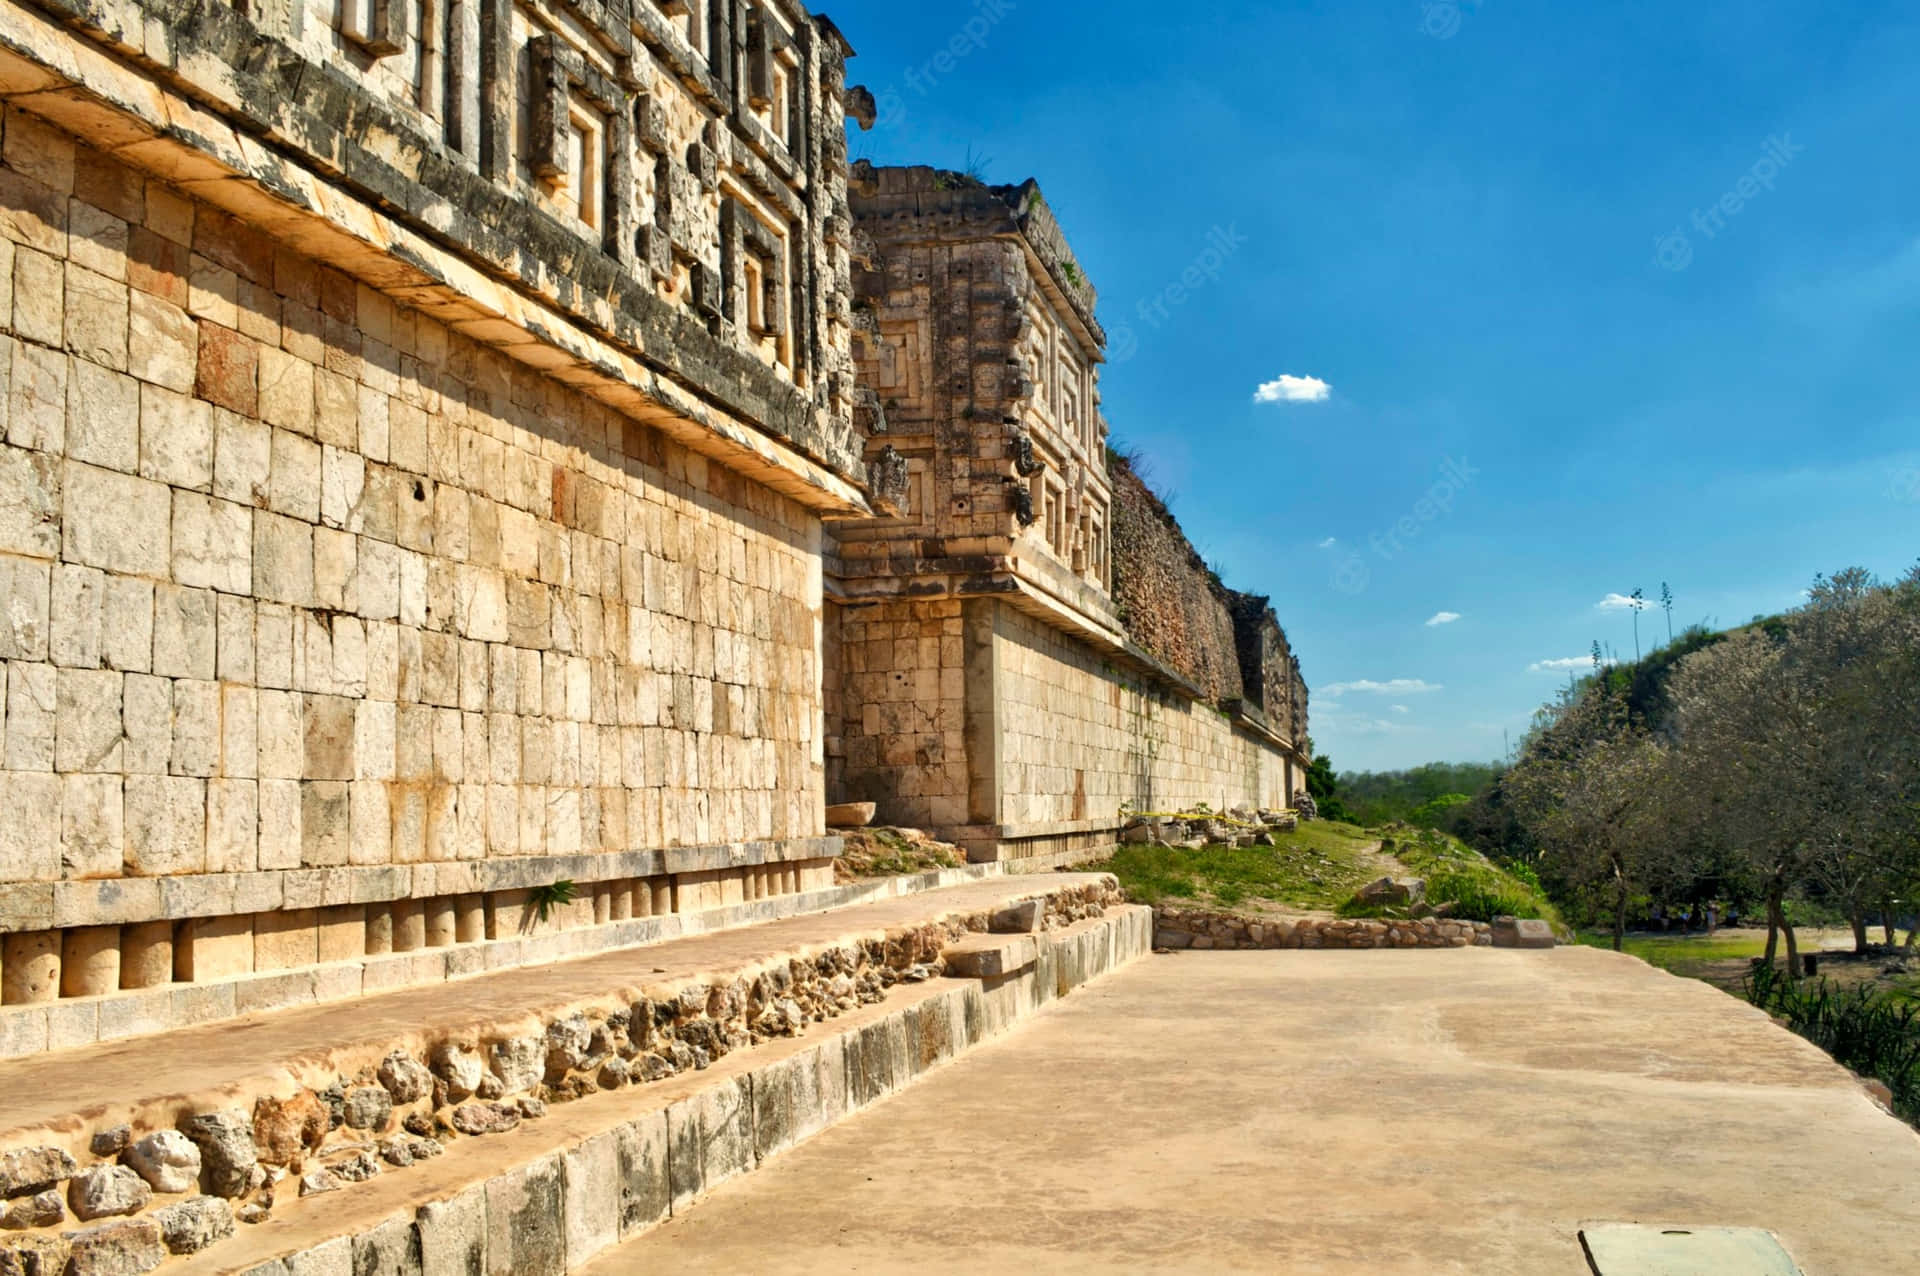 Spectacular View Of The Ancient Mayan City Of Uxmal, Mexico Wallpaper